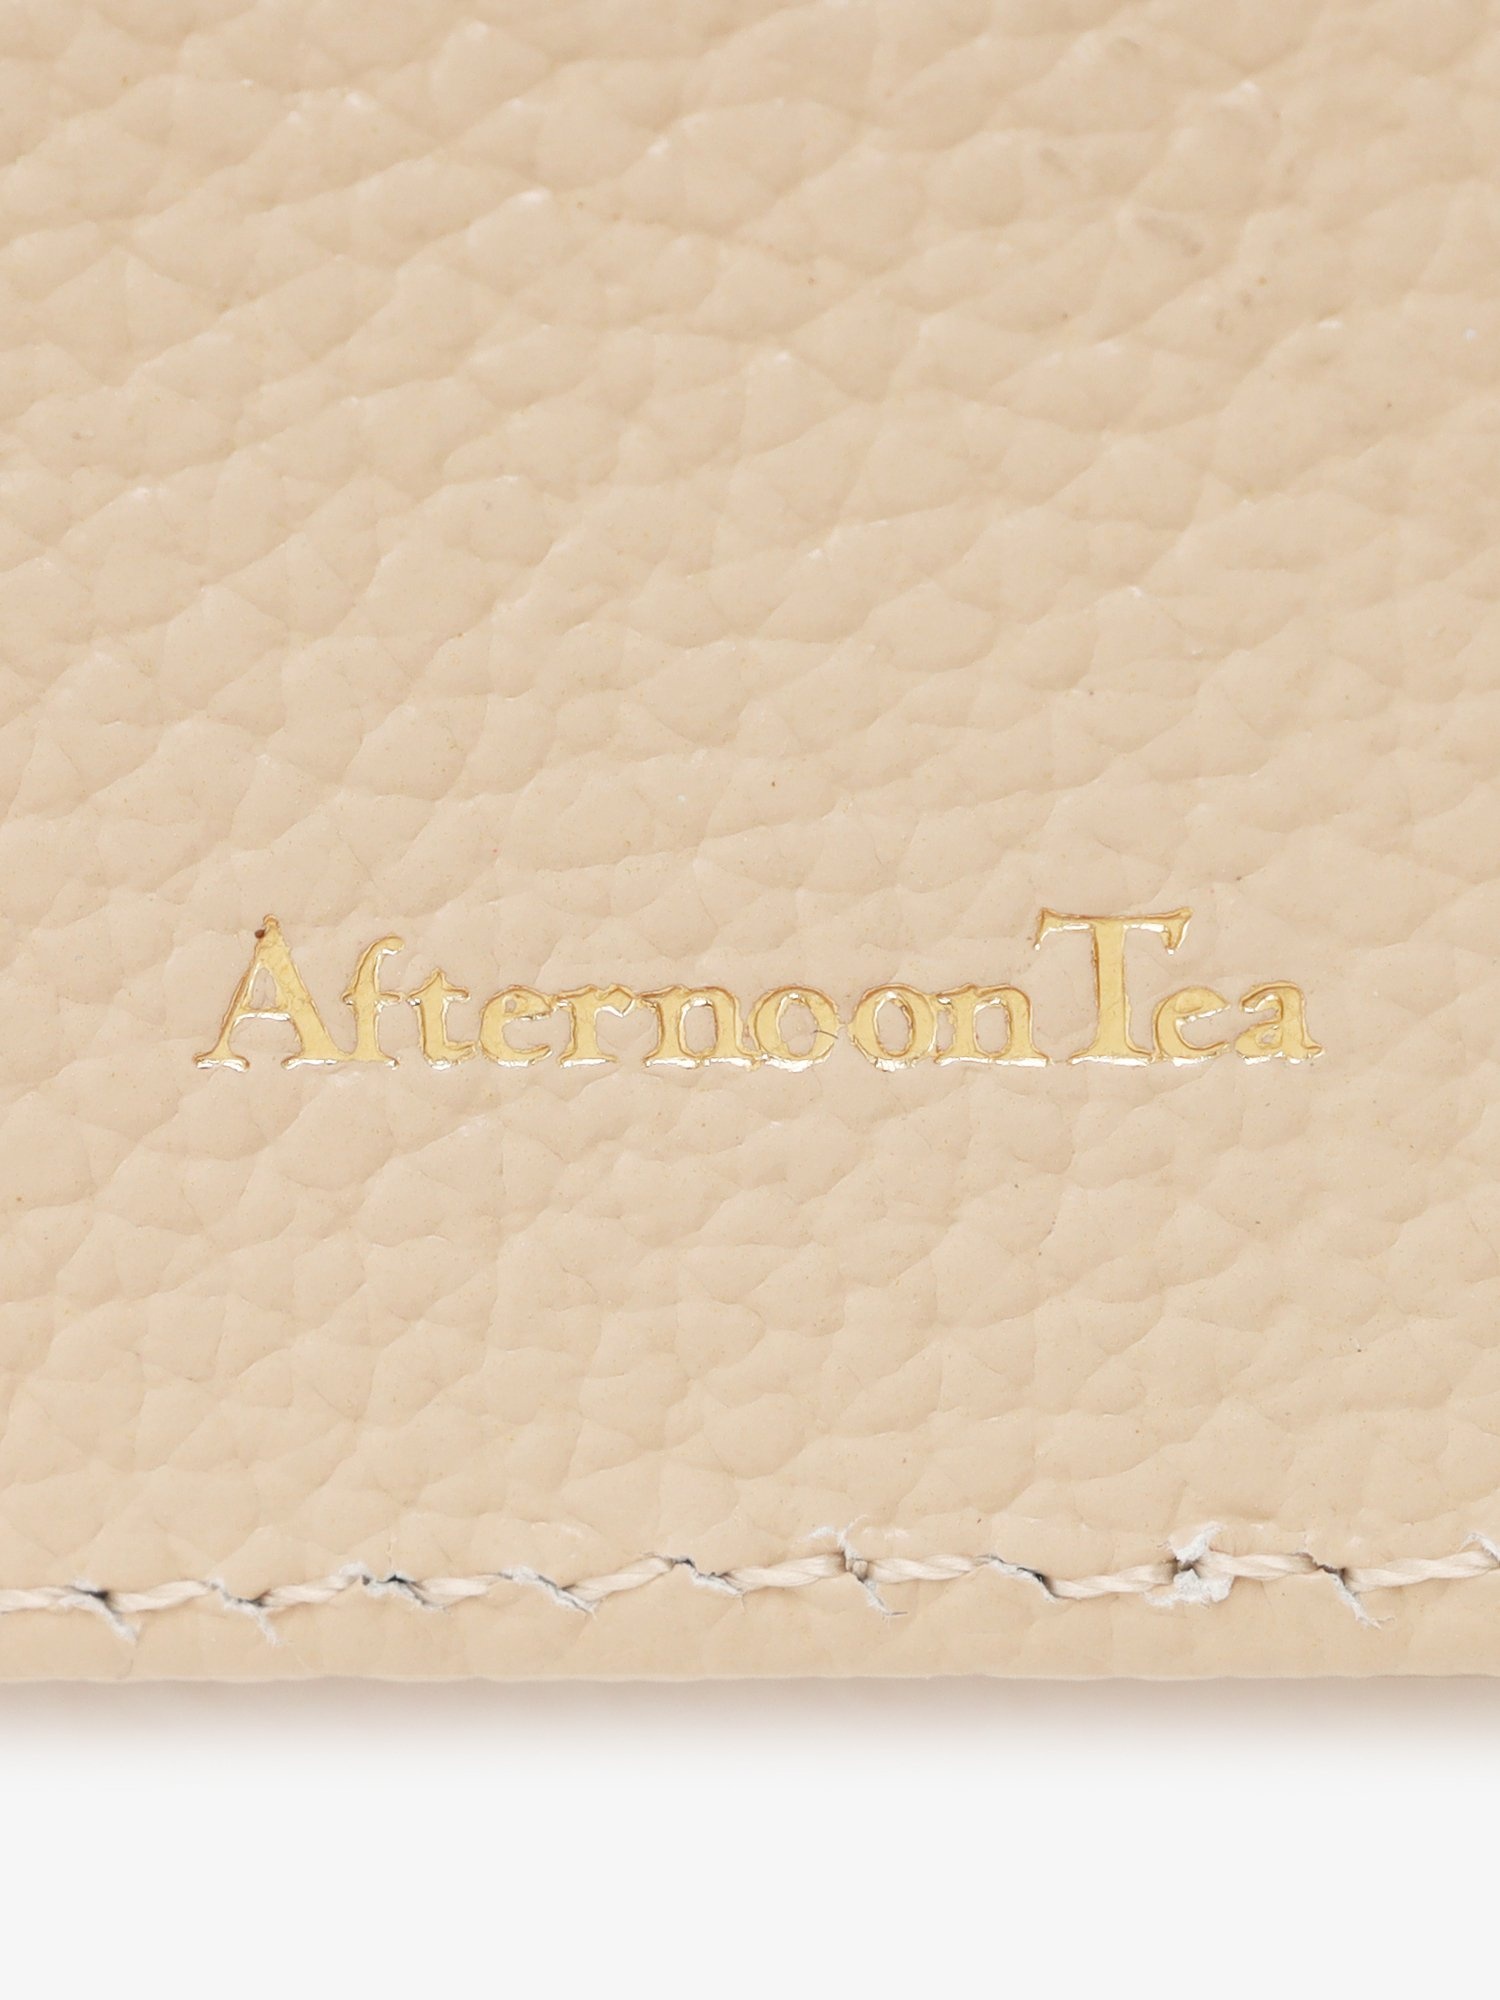 Afternoon Tea LIVING｜フラワーチャーム付き本革ミニ財布/Afternoon